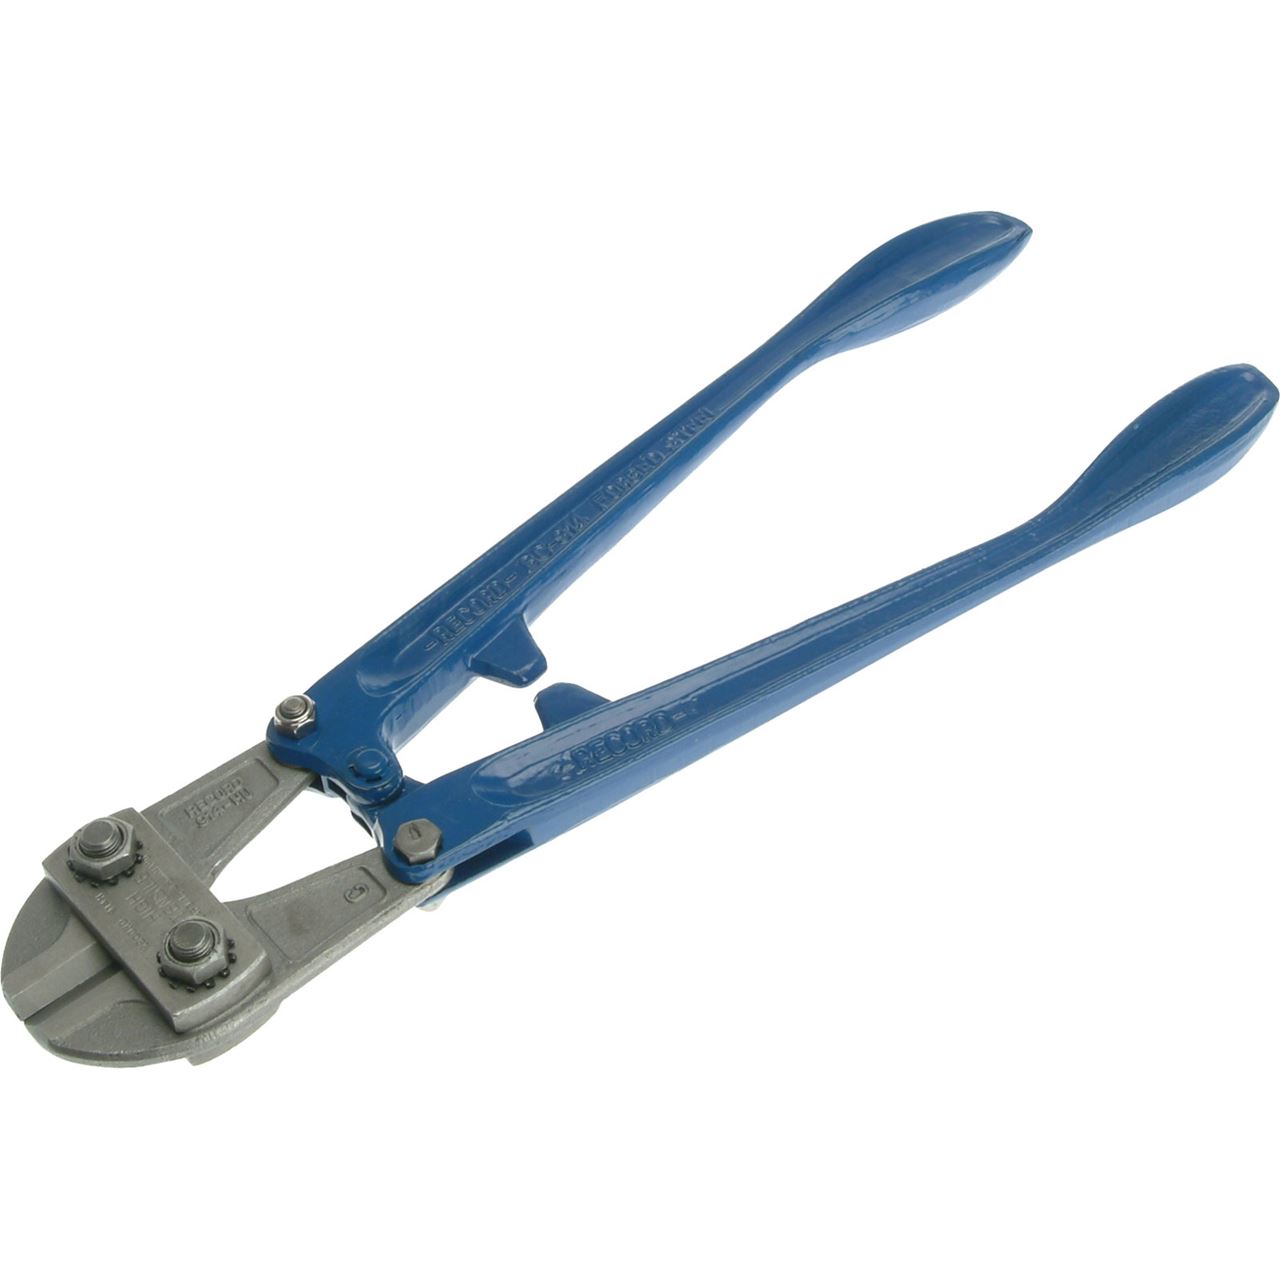 Medium-duty Cable Cutters